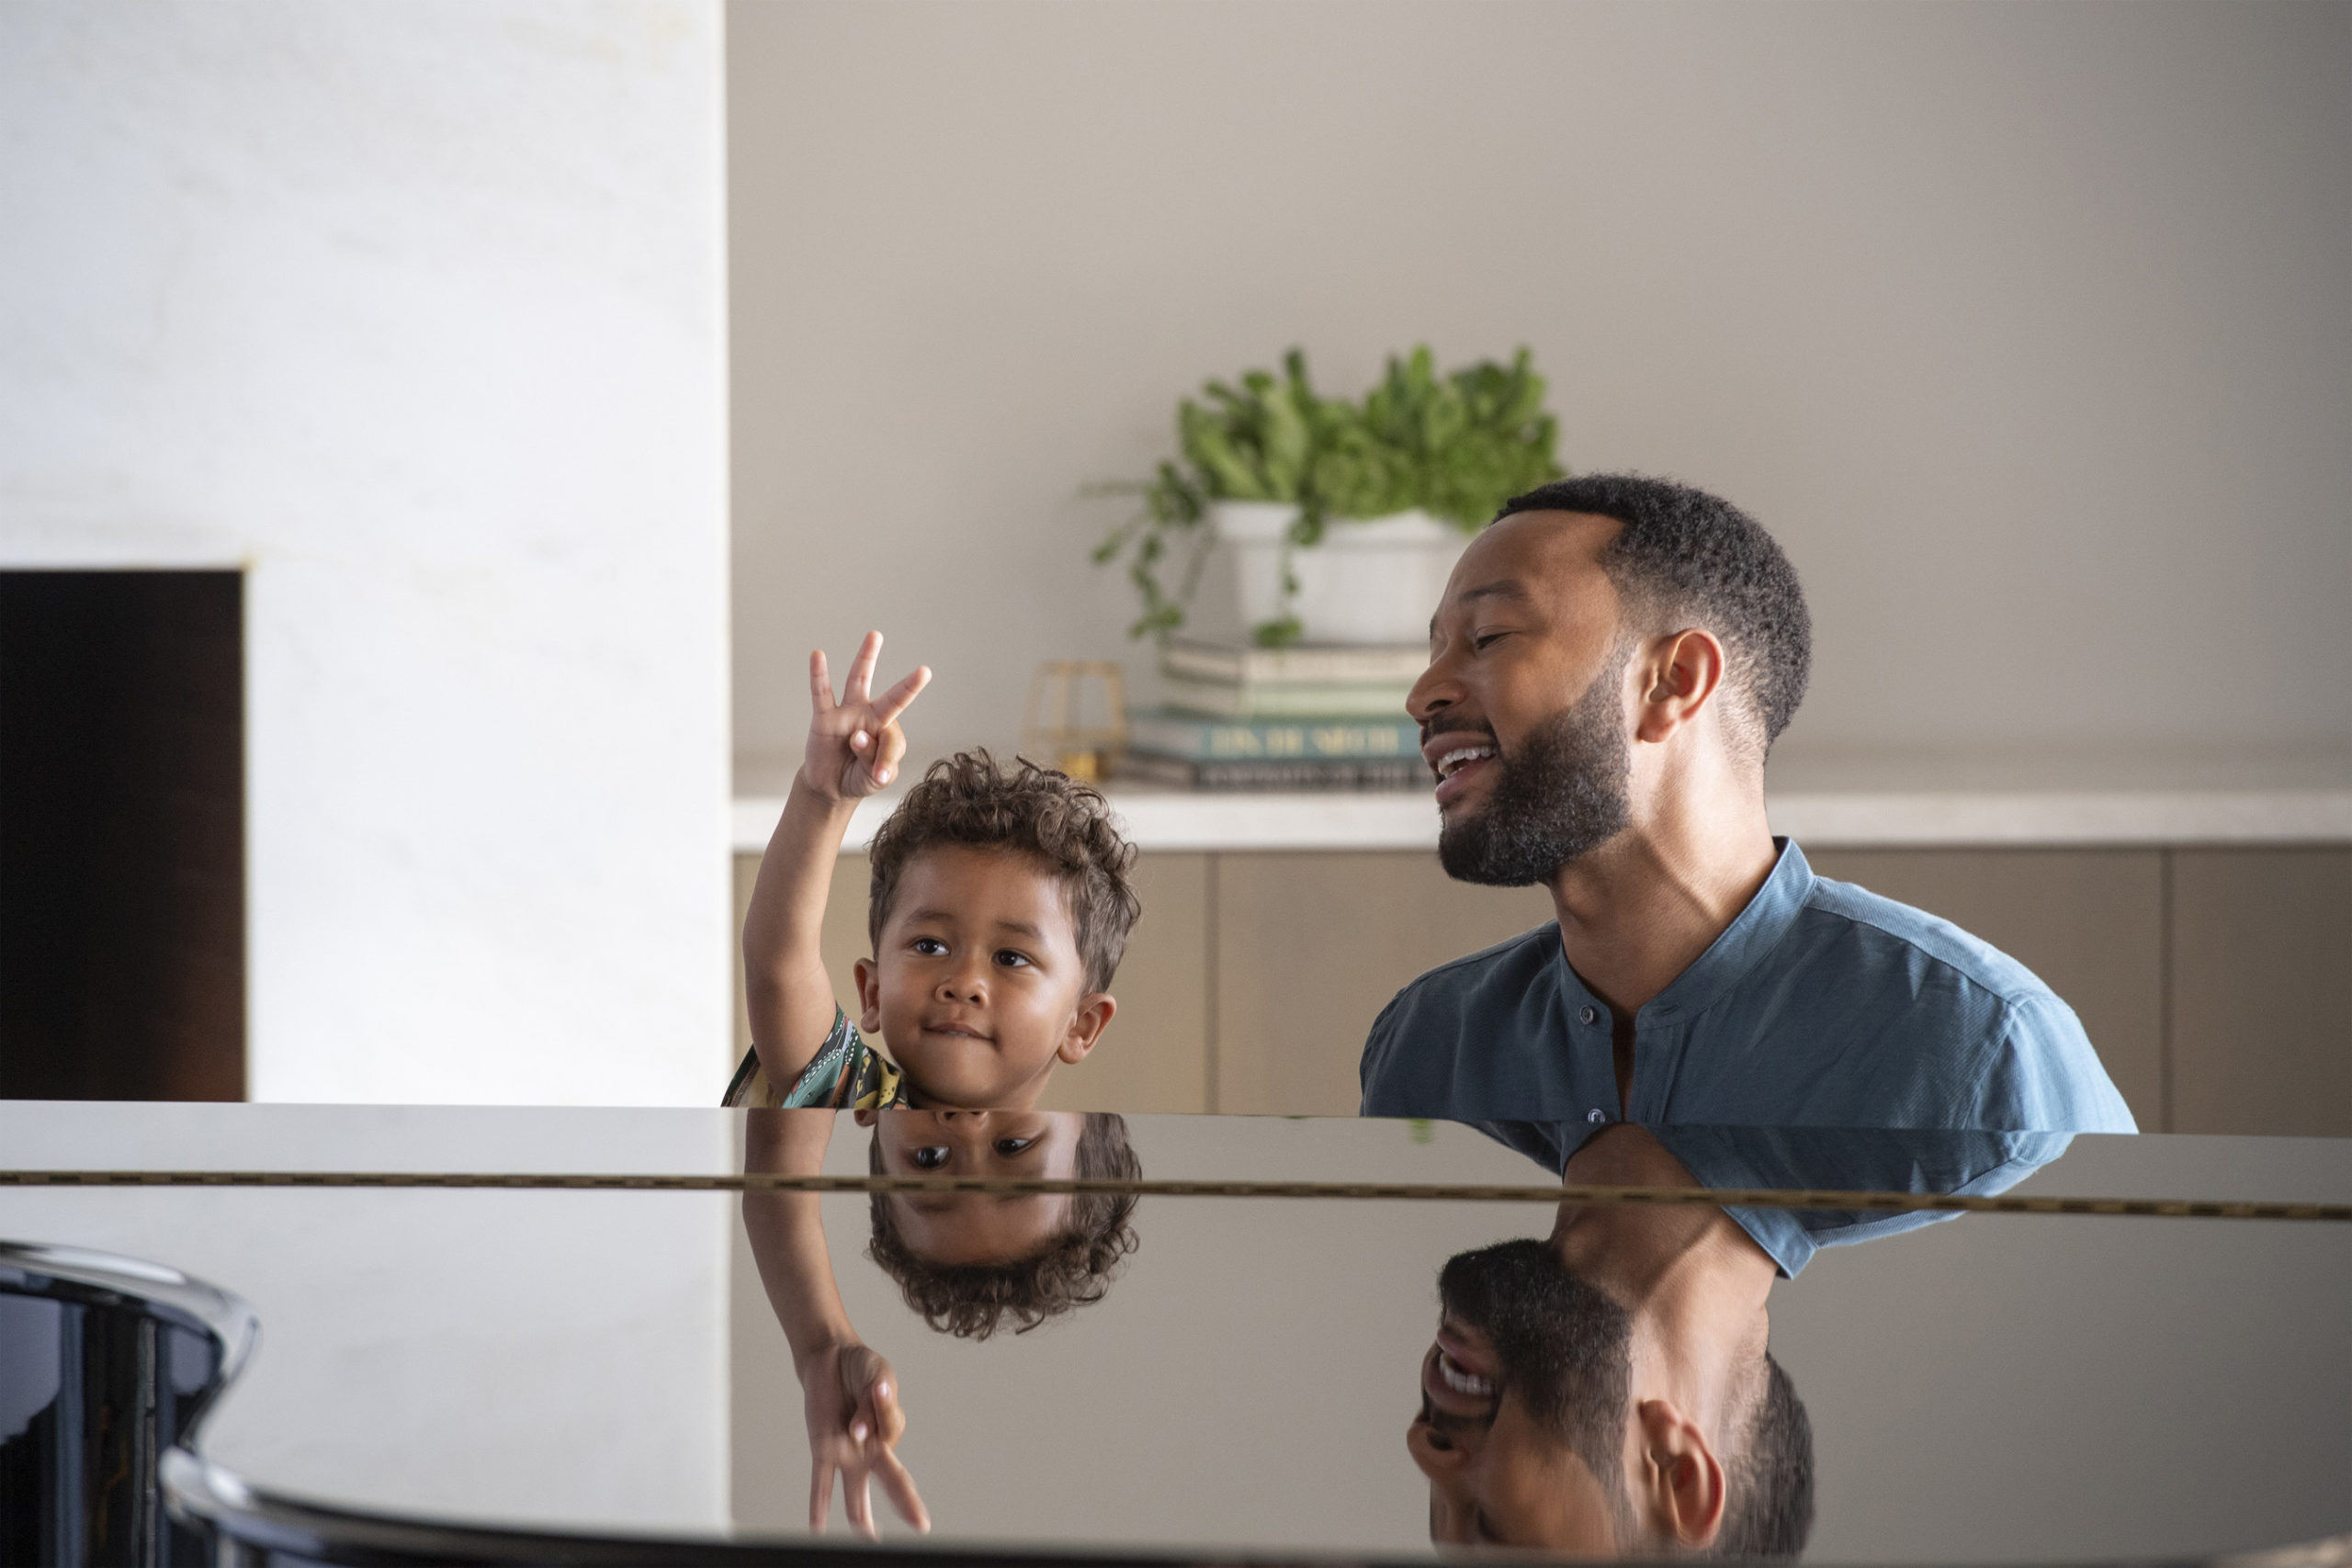 John Legend plays piano with his son sitting beside him in a new Vrbo commercial